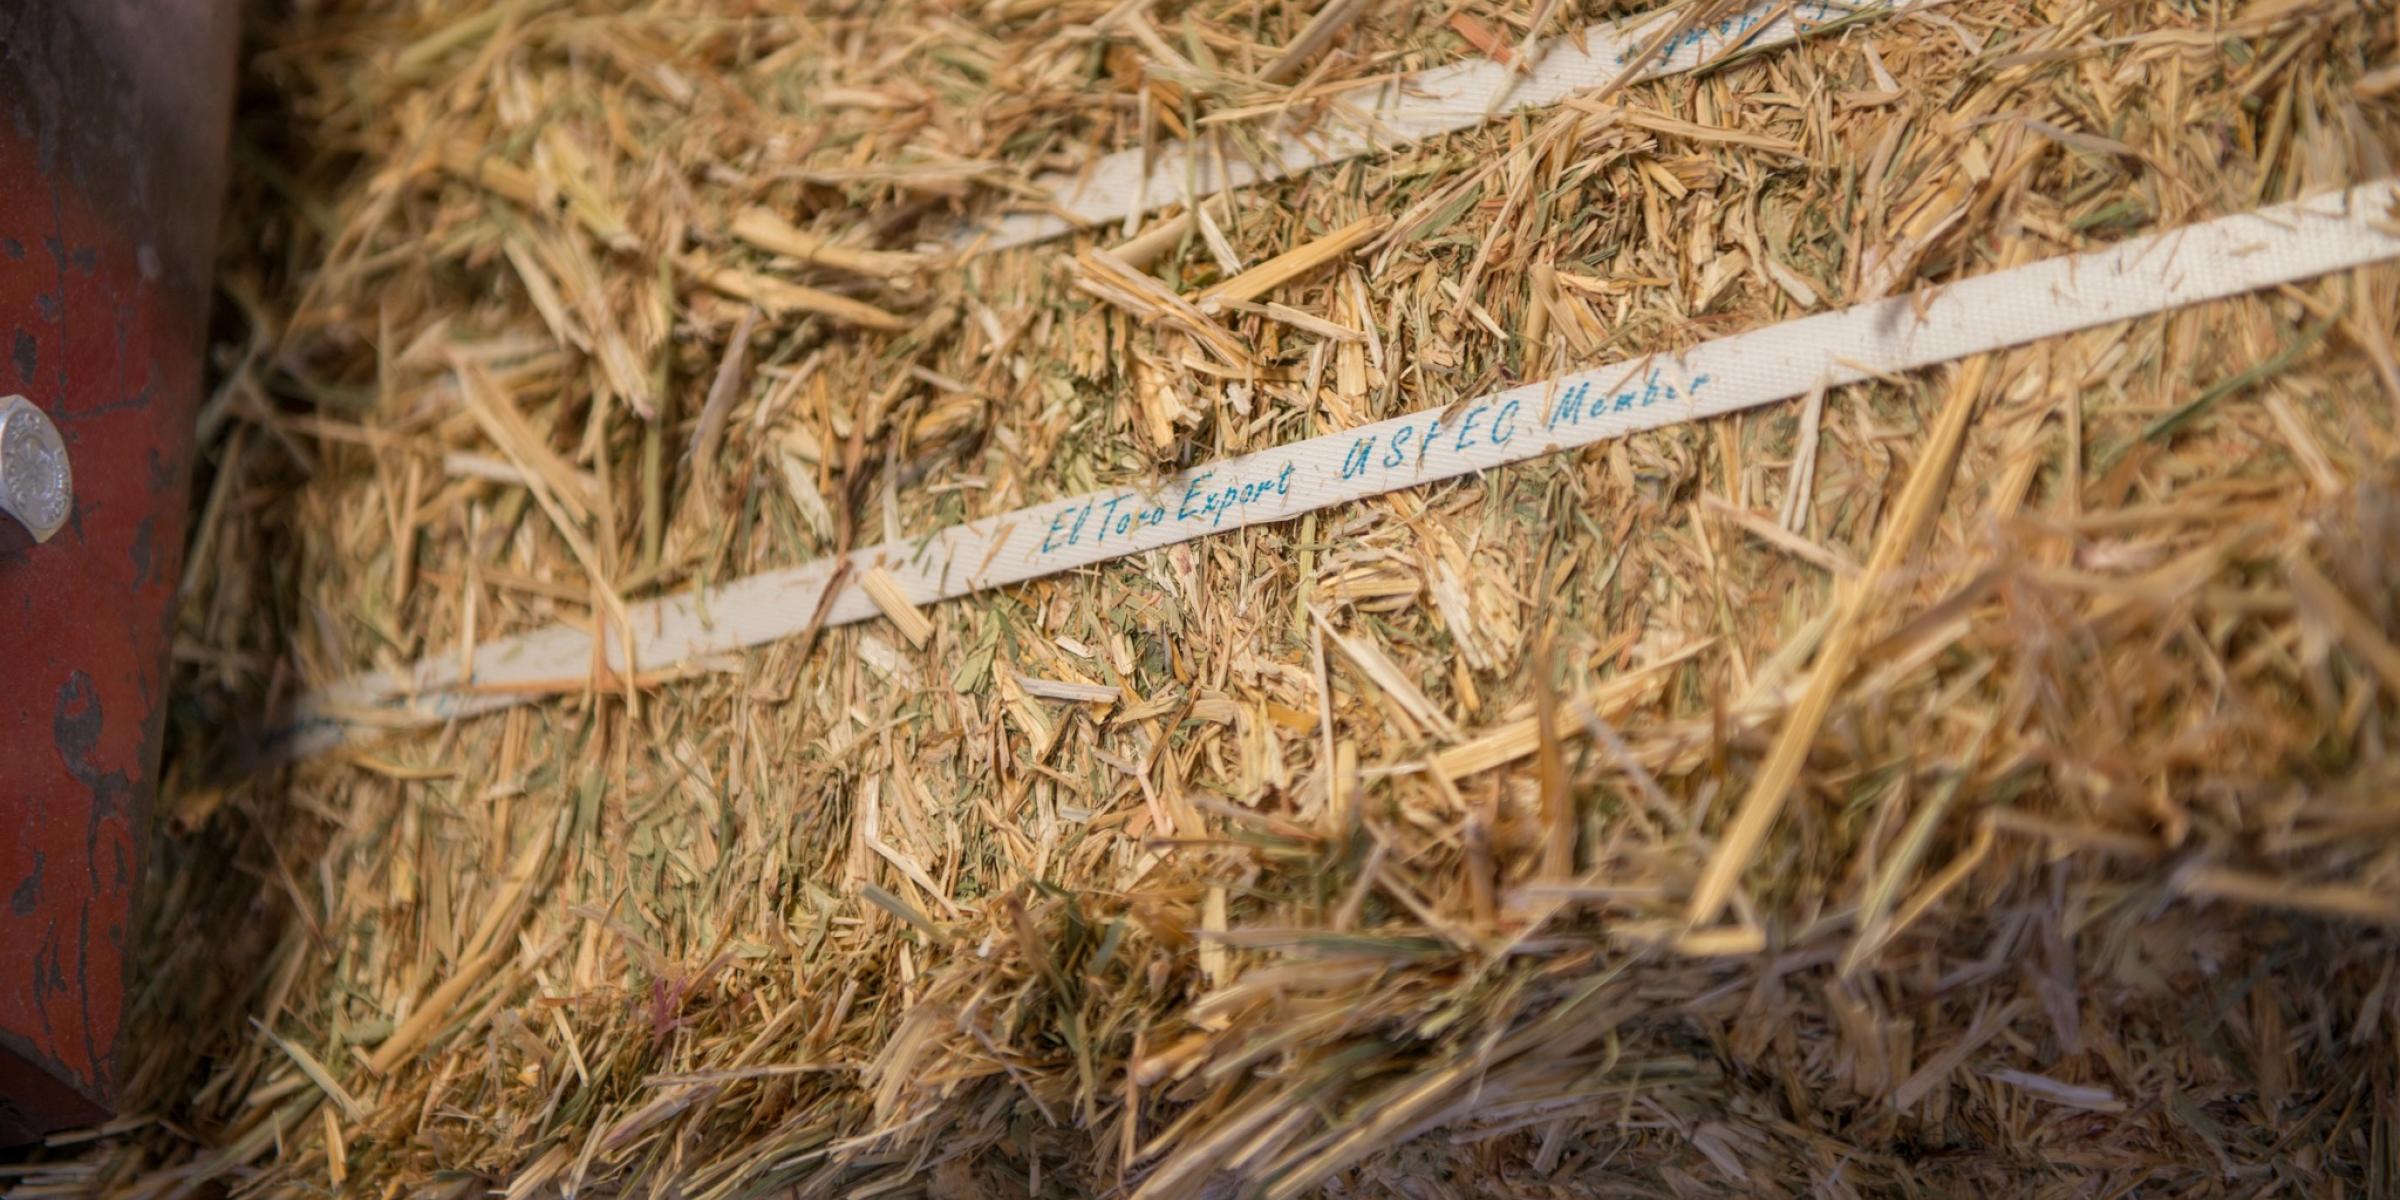 Close up of hay bale